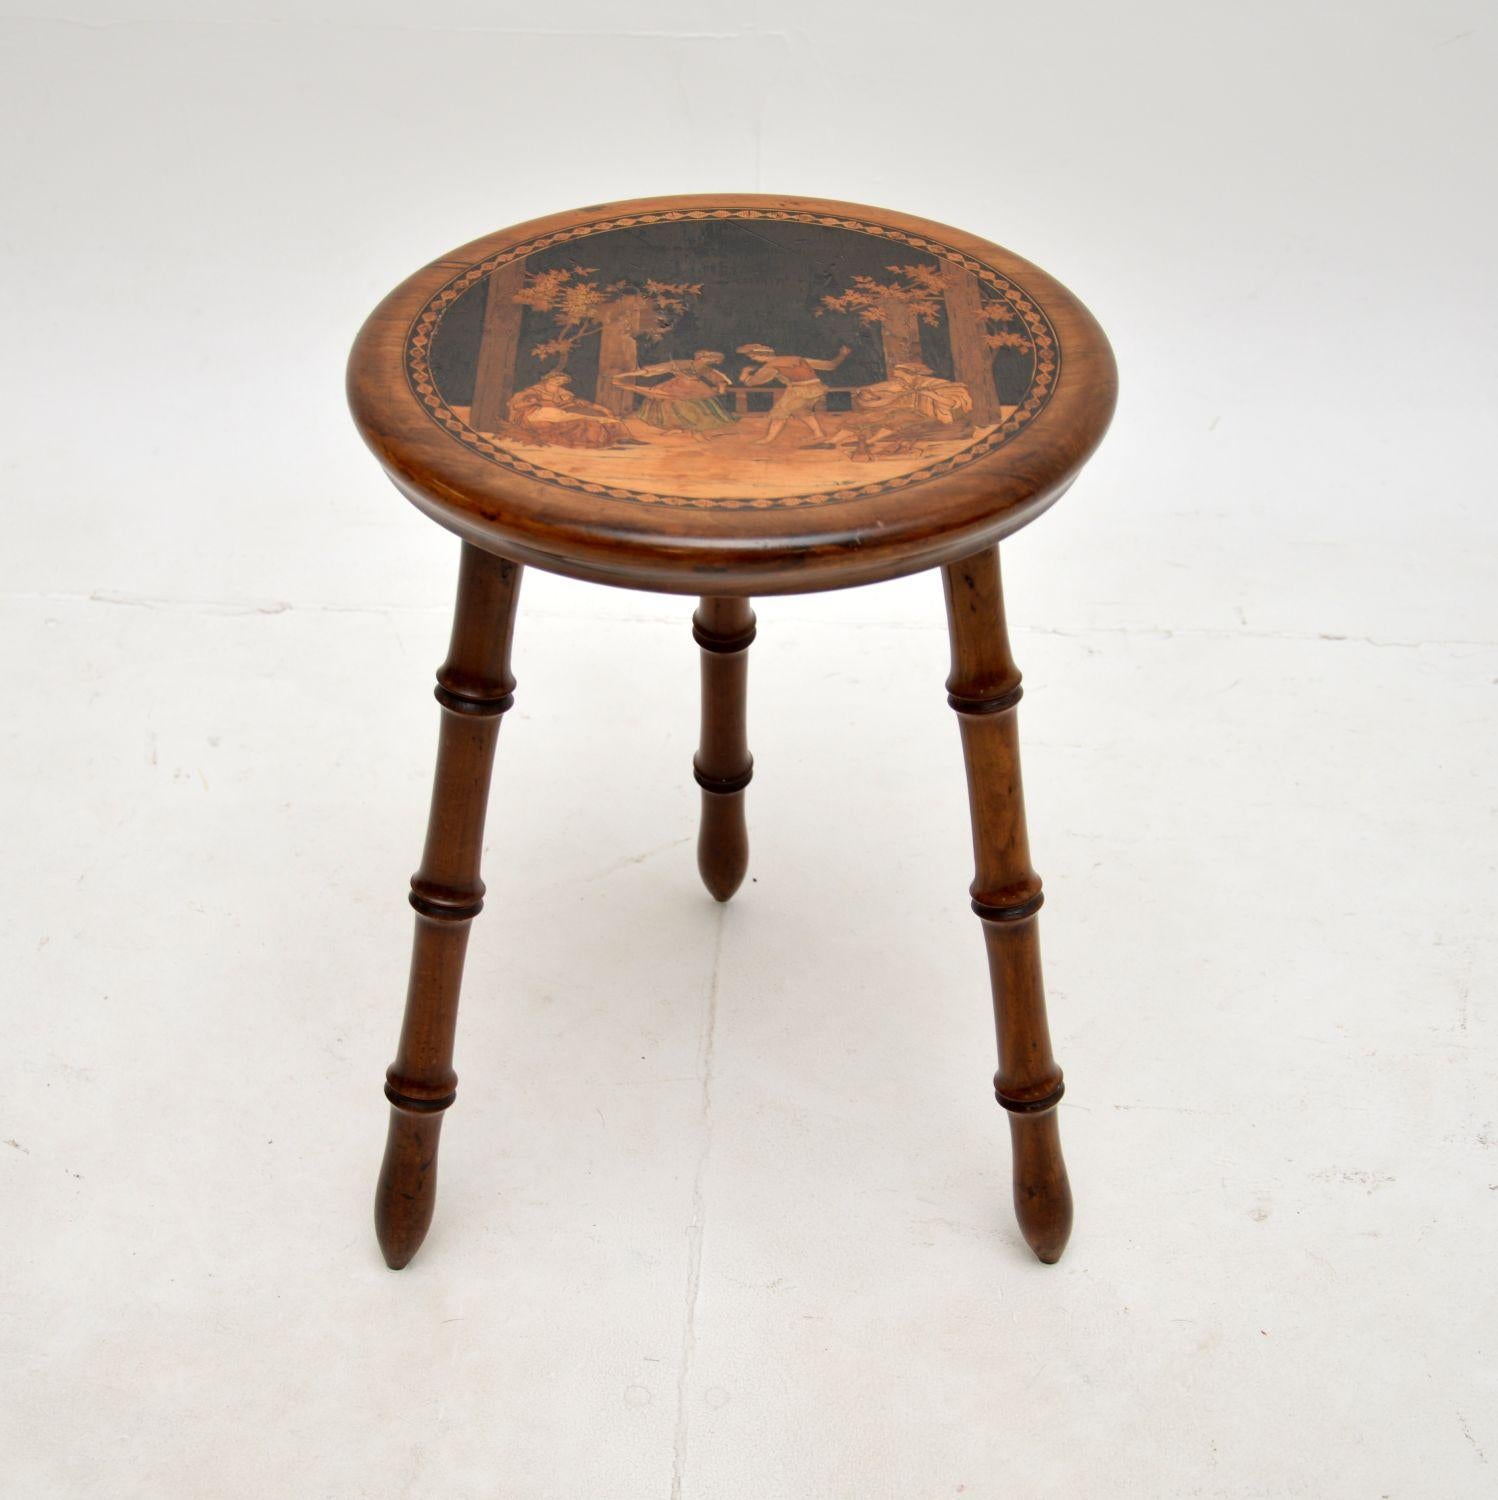 A beautiful antique Italian inlaid olive wood stool. This was made in Sorrento, Italy, it dates from around the 1900-1910 period.

It is of superb quality, with absolutely gorgeous inlays depicting an Italian classical scene. The three legs are